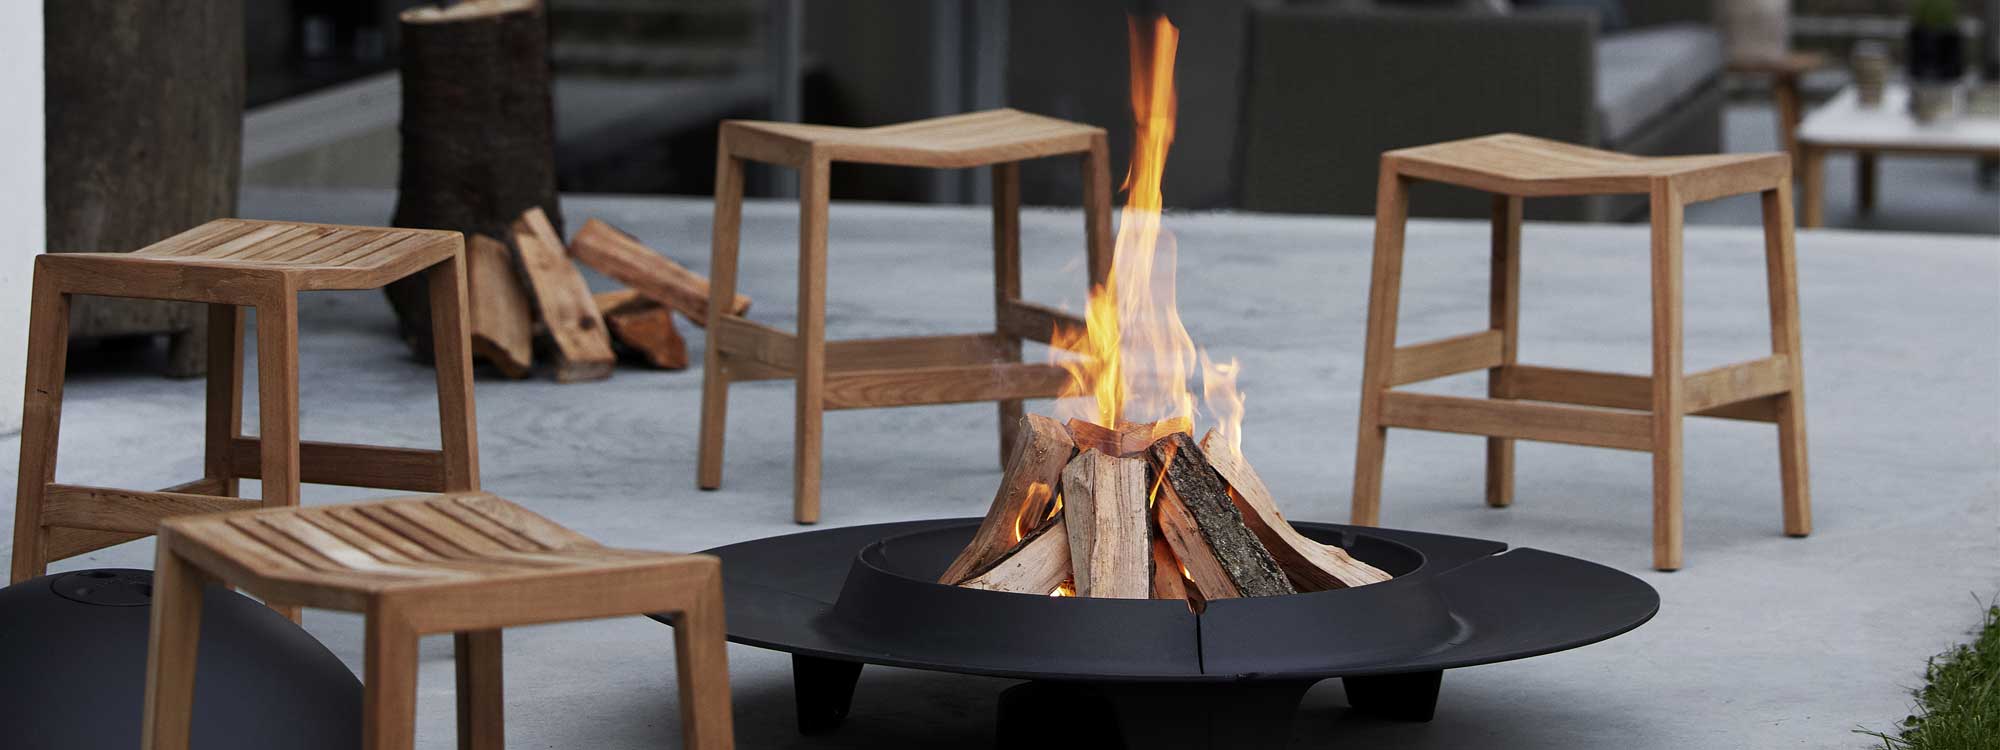 Image of Flip teak stool seats around Ember fire pit by Cane-line